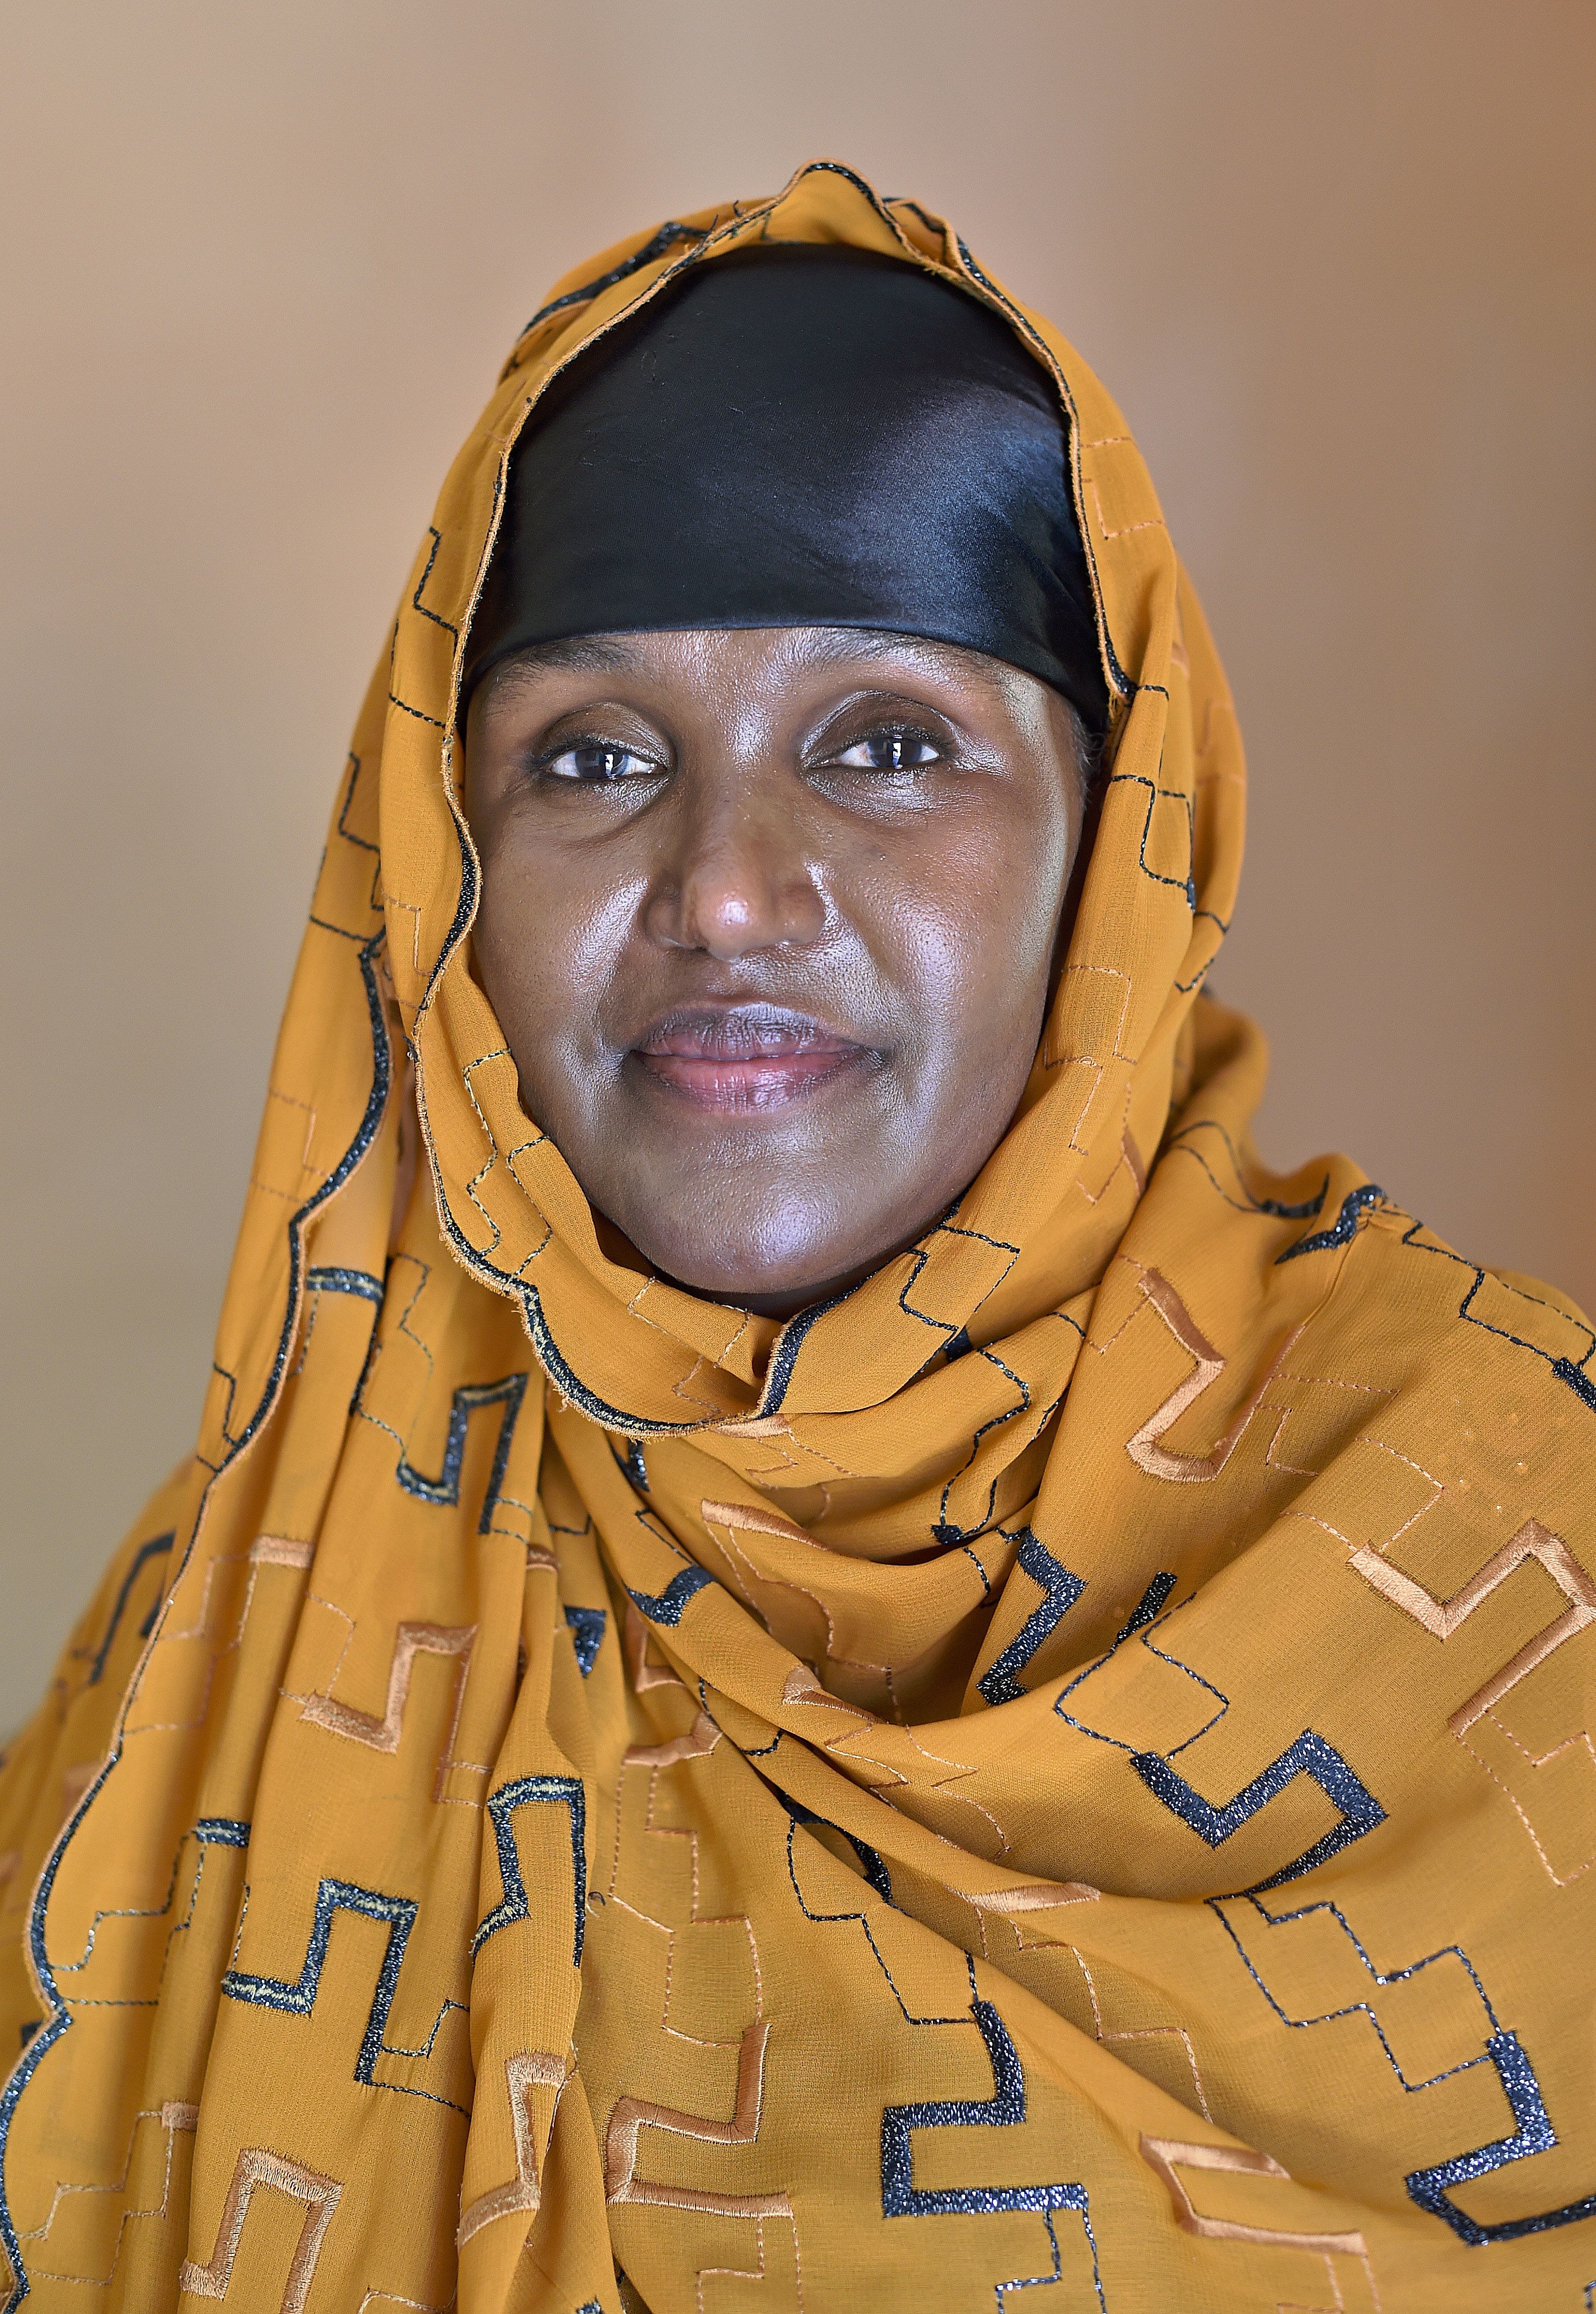 Fartuun Adan, who runs the Elman Peace and Human Rights Centre in Mogadishu where survivors of sexual violence can find refuge, medical care and support, poses on March 24, 2015. (Carl De Souza—AFP/Getty Images)